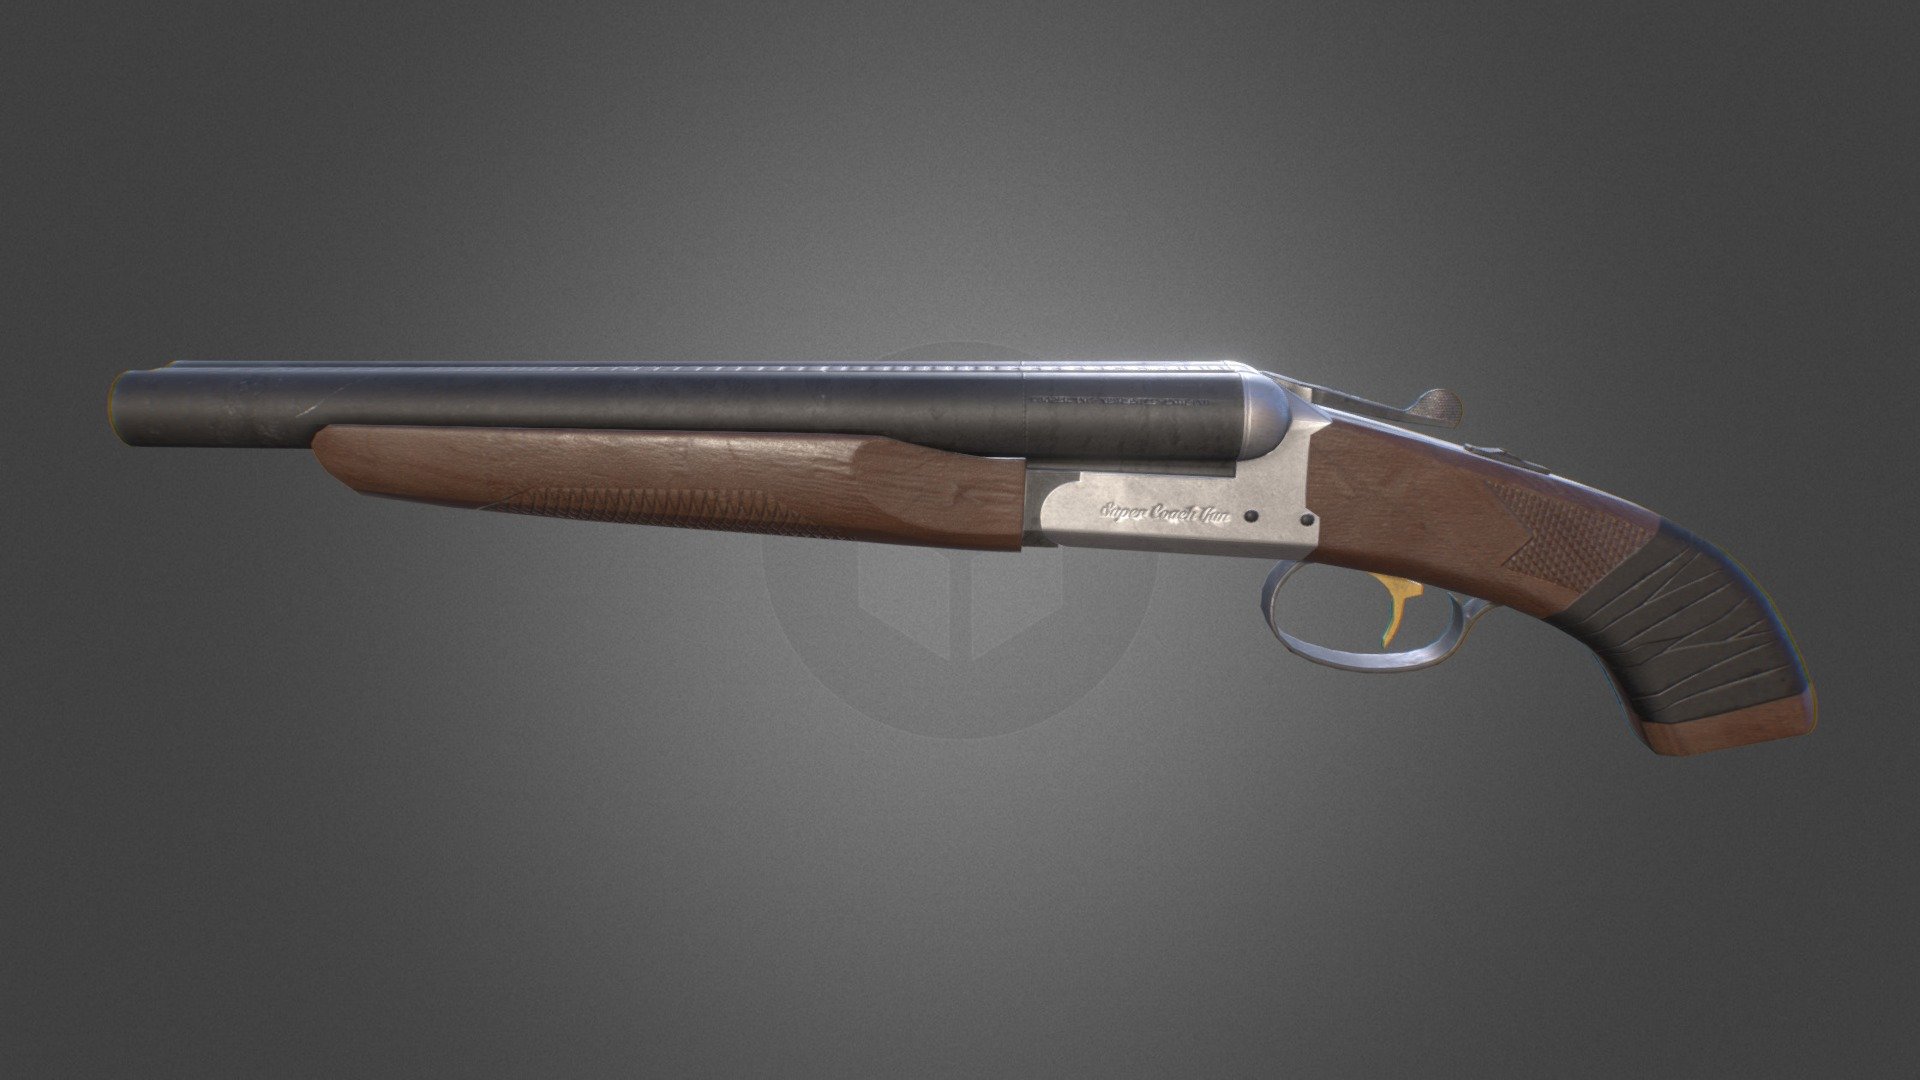 A Sawed-Off Shotgun, game asset, I created as part of a pack for the Unreal Marketplace. It has been used in the popular VR game &lsquo;Hotdogs, Horseshoes and Hand Grenades' as well as &lsquo;Player Unknown's Battlegrounds'. It's game ready with 4K PBR textures. No game's complete without everyones favourite boomstick! - Sawed-Off Shotgun, Game Asset - Buy Royalty Free 3D model by James A Cooper (@jamescooper) 3d model